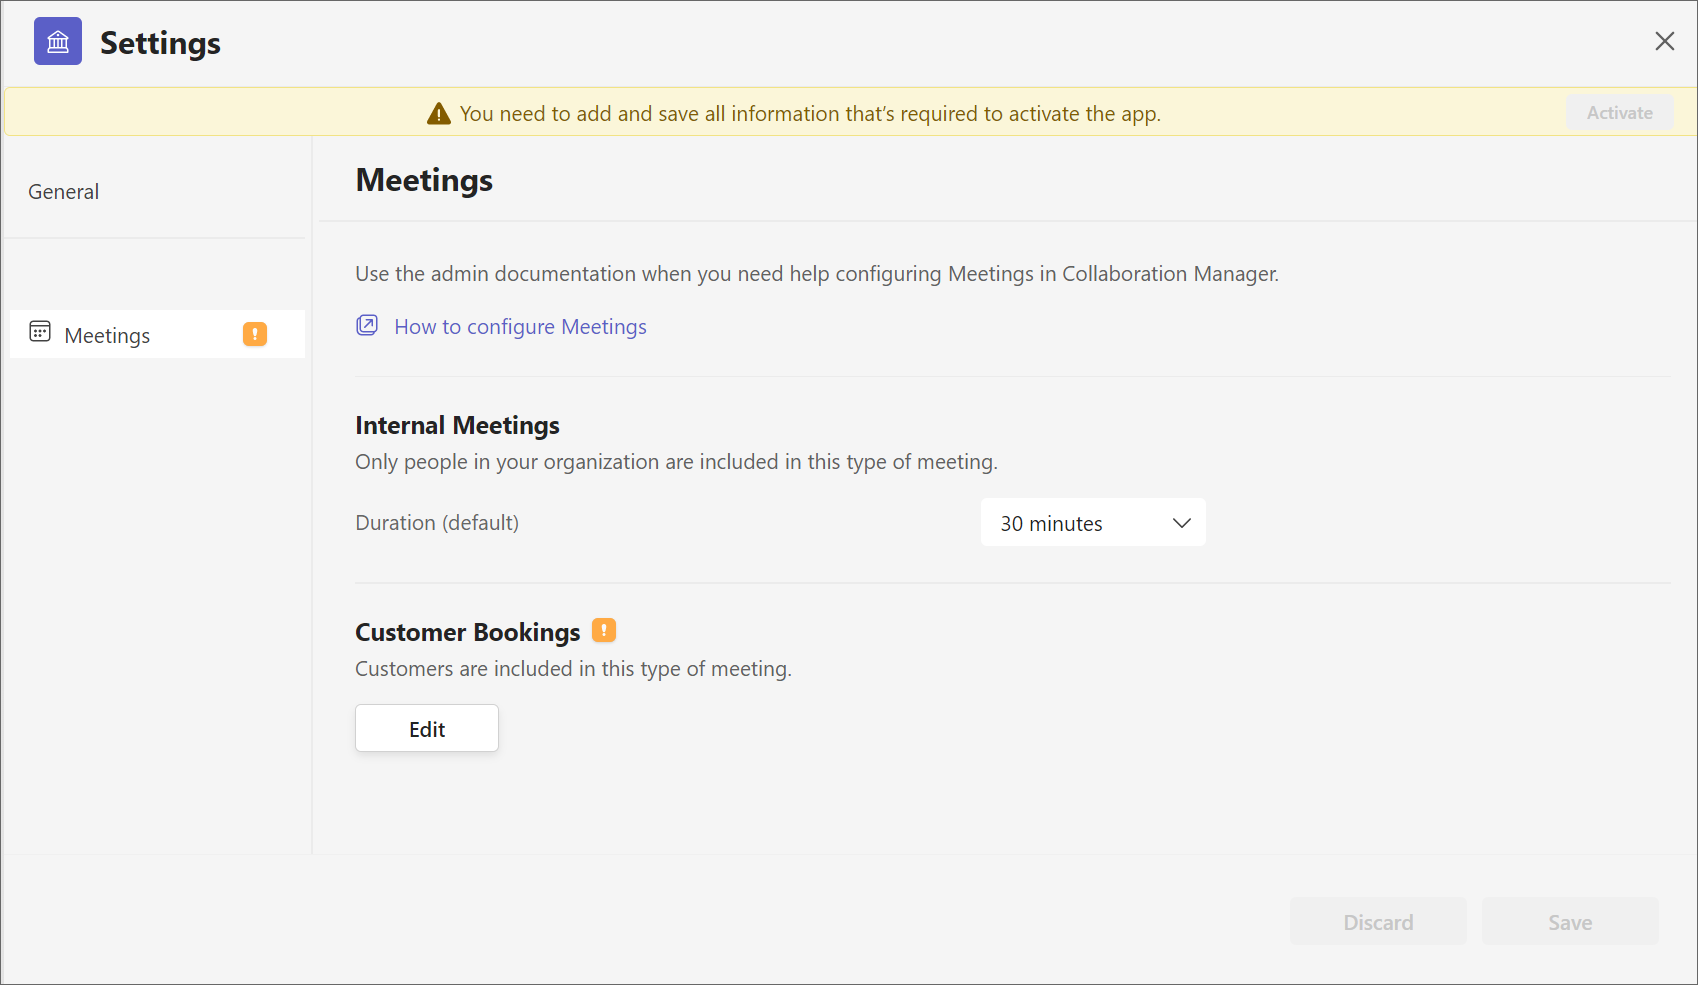 Image of the meetings settings page showing durations from 15 minutes to two hours.